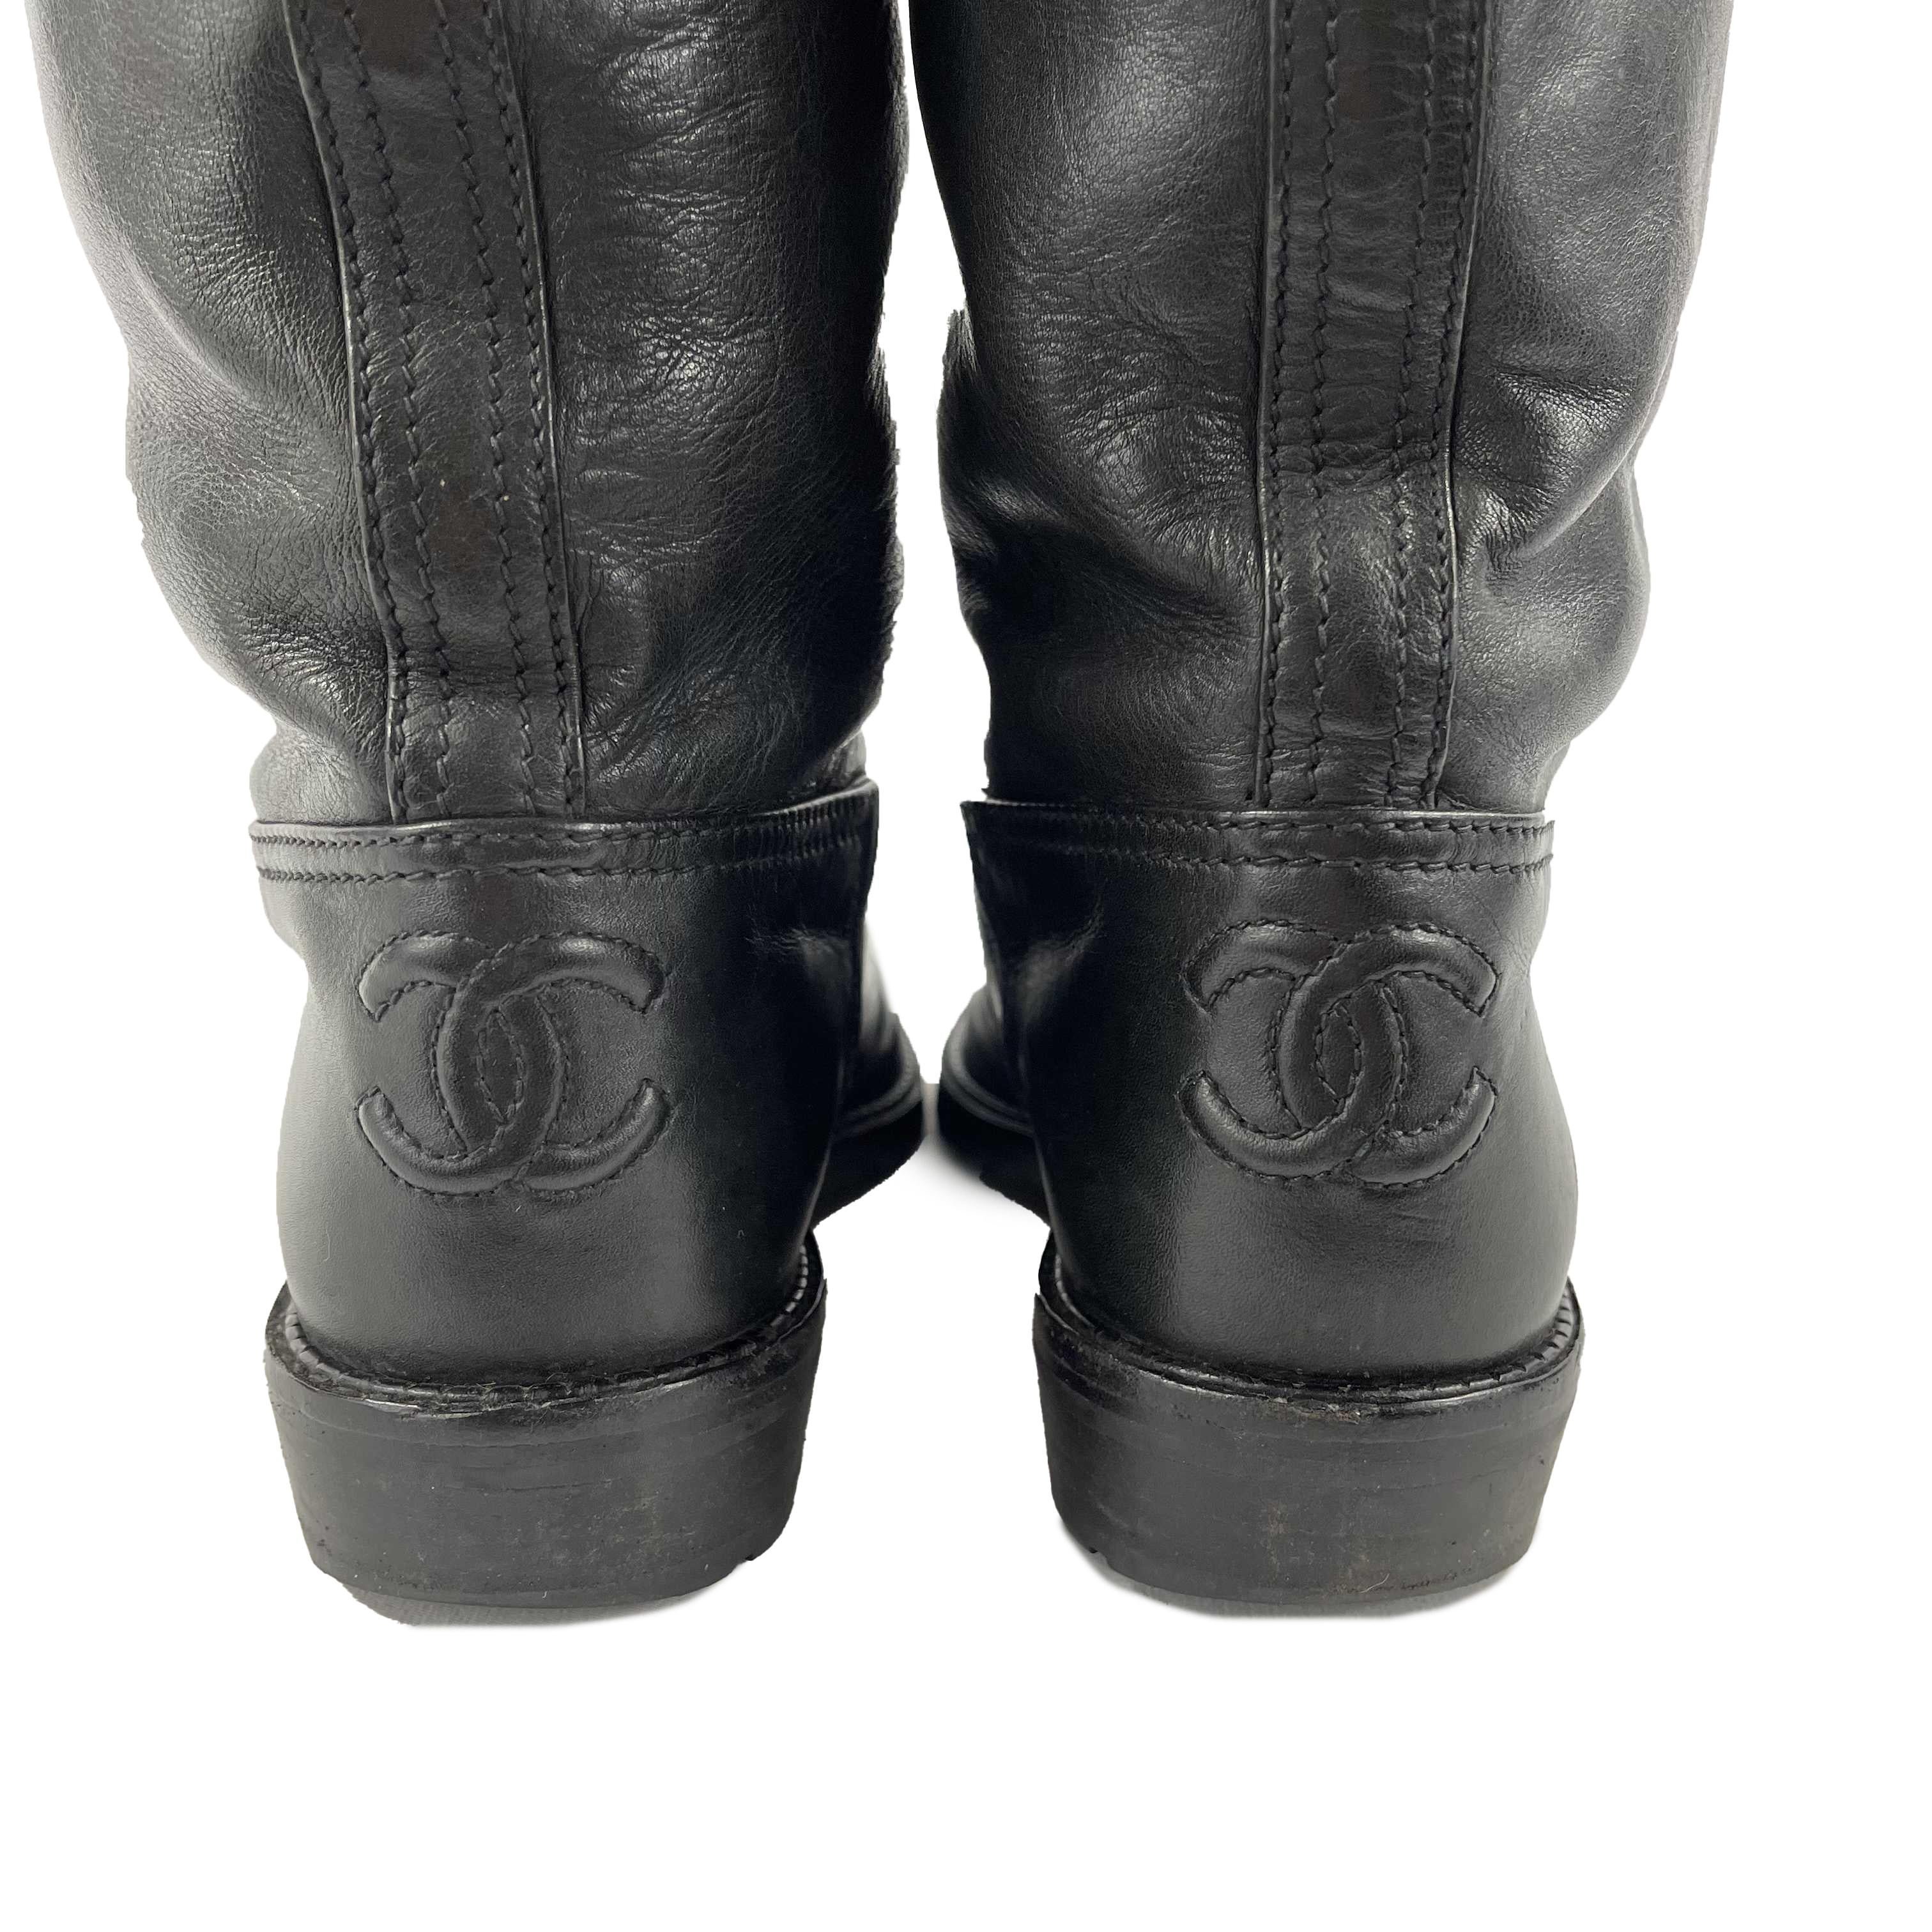 CHANEL Black Knee-High Leather Lace-Up Biker Boots FR 36 US 6 In Excellent Condition For Sale In Sanford, FL